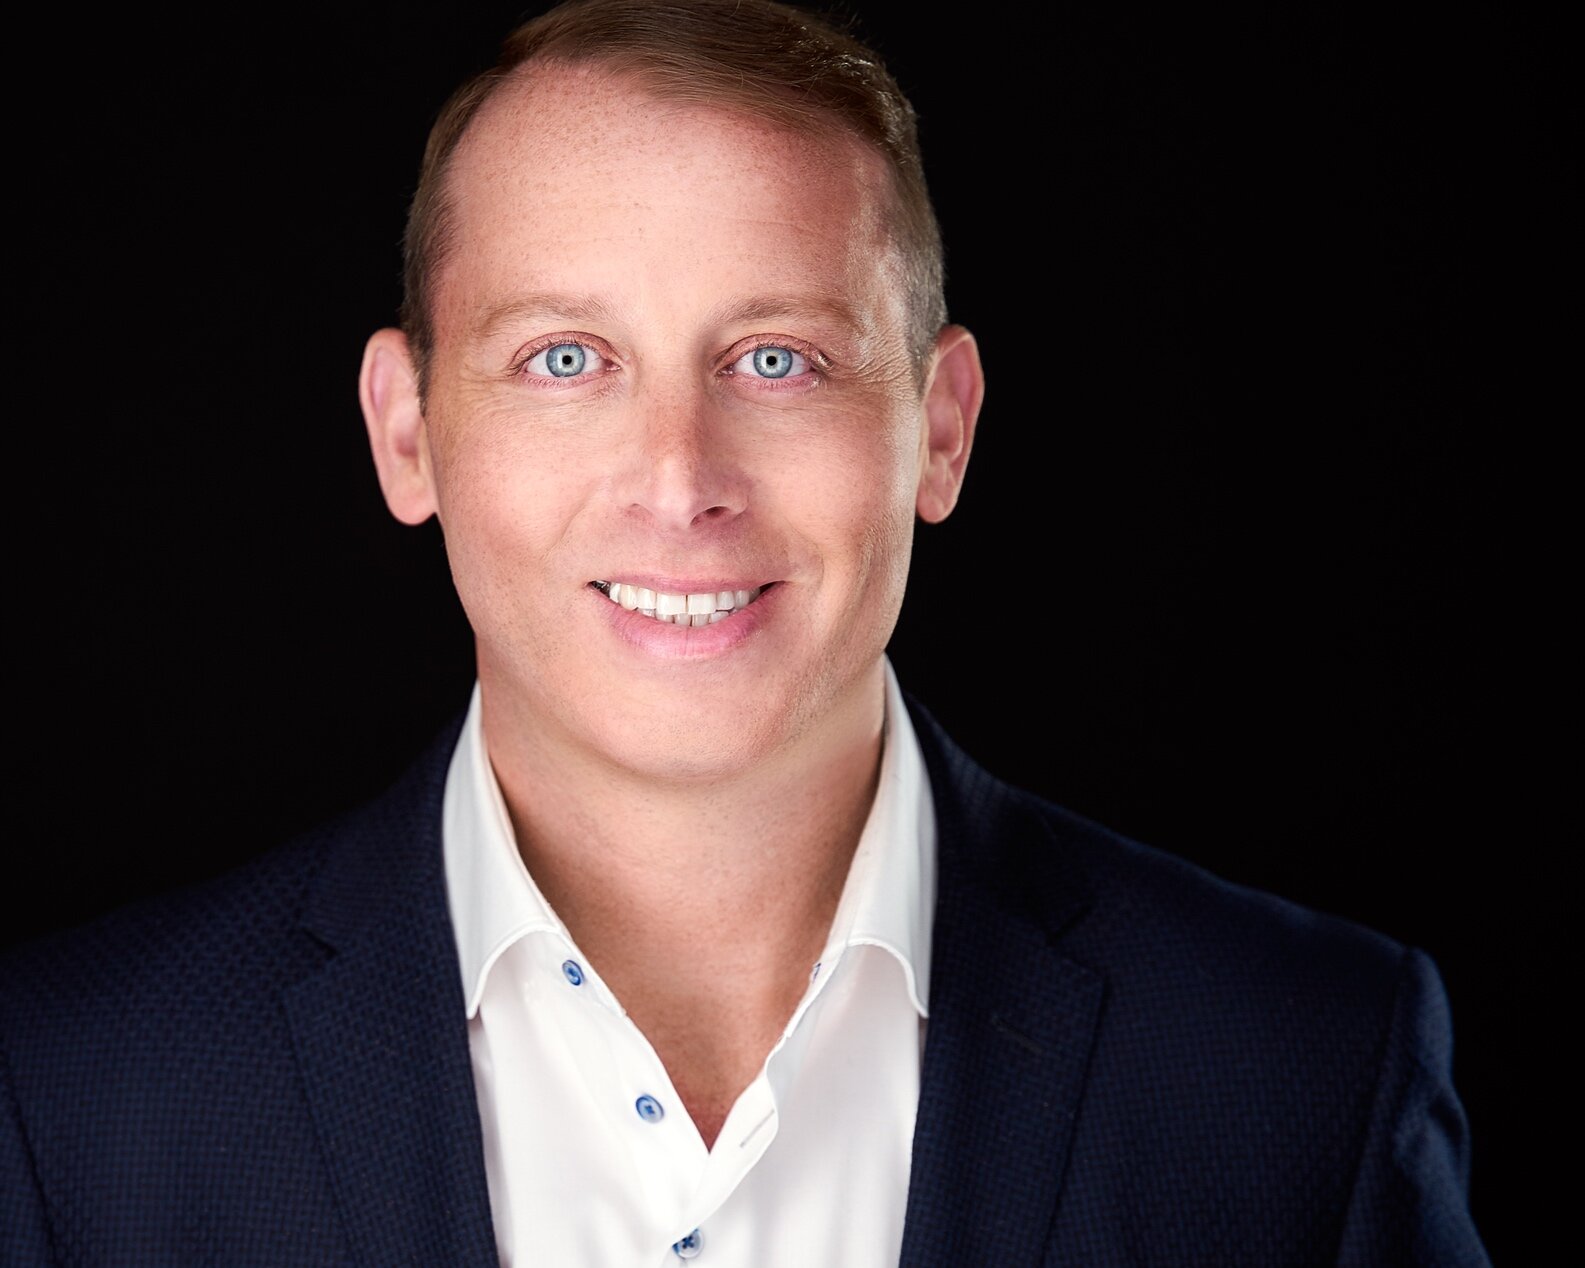 20190708_ForestHillRealEstate_Headshots0381_Social.png